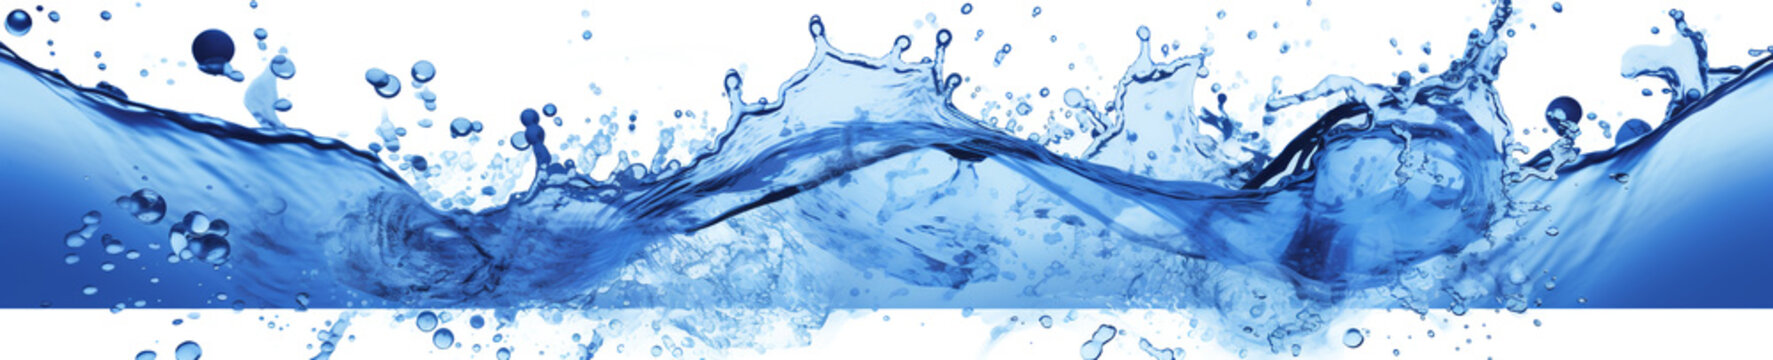 Water splash isolated on white background. Blue water splashes isolated on white background. Clipping path included. blue water splash macro close up isolated on white background with clipping path